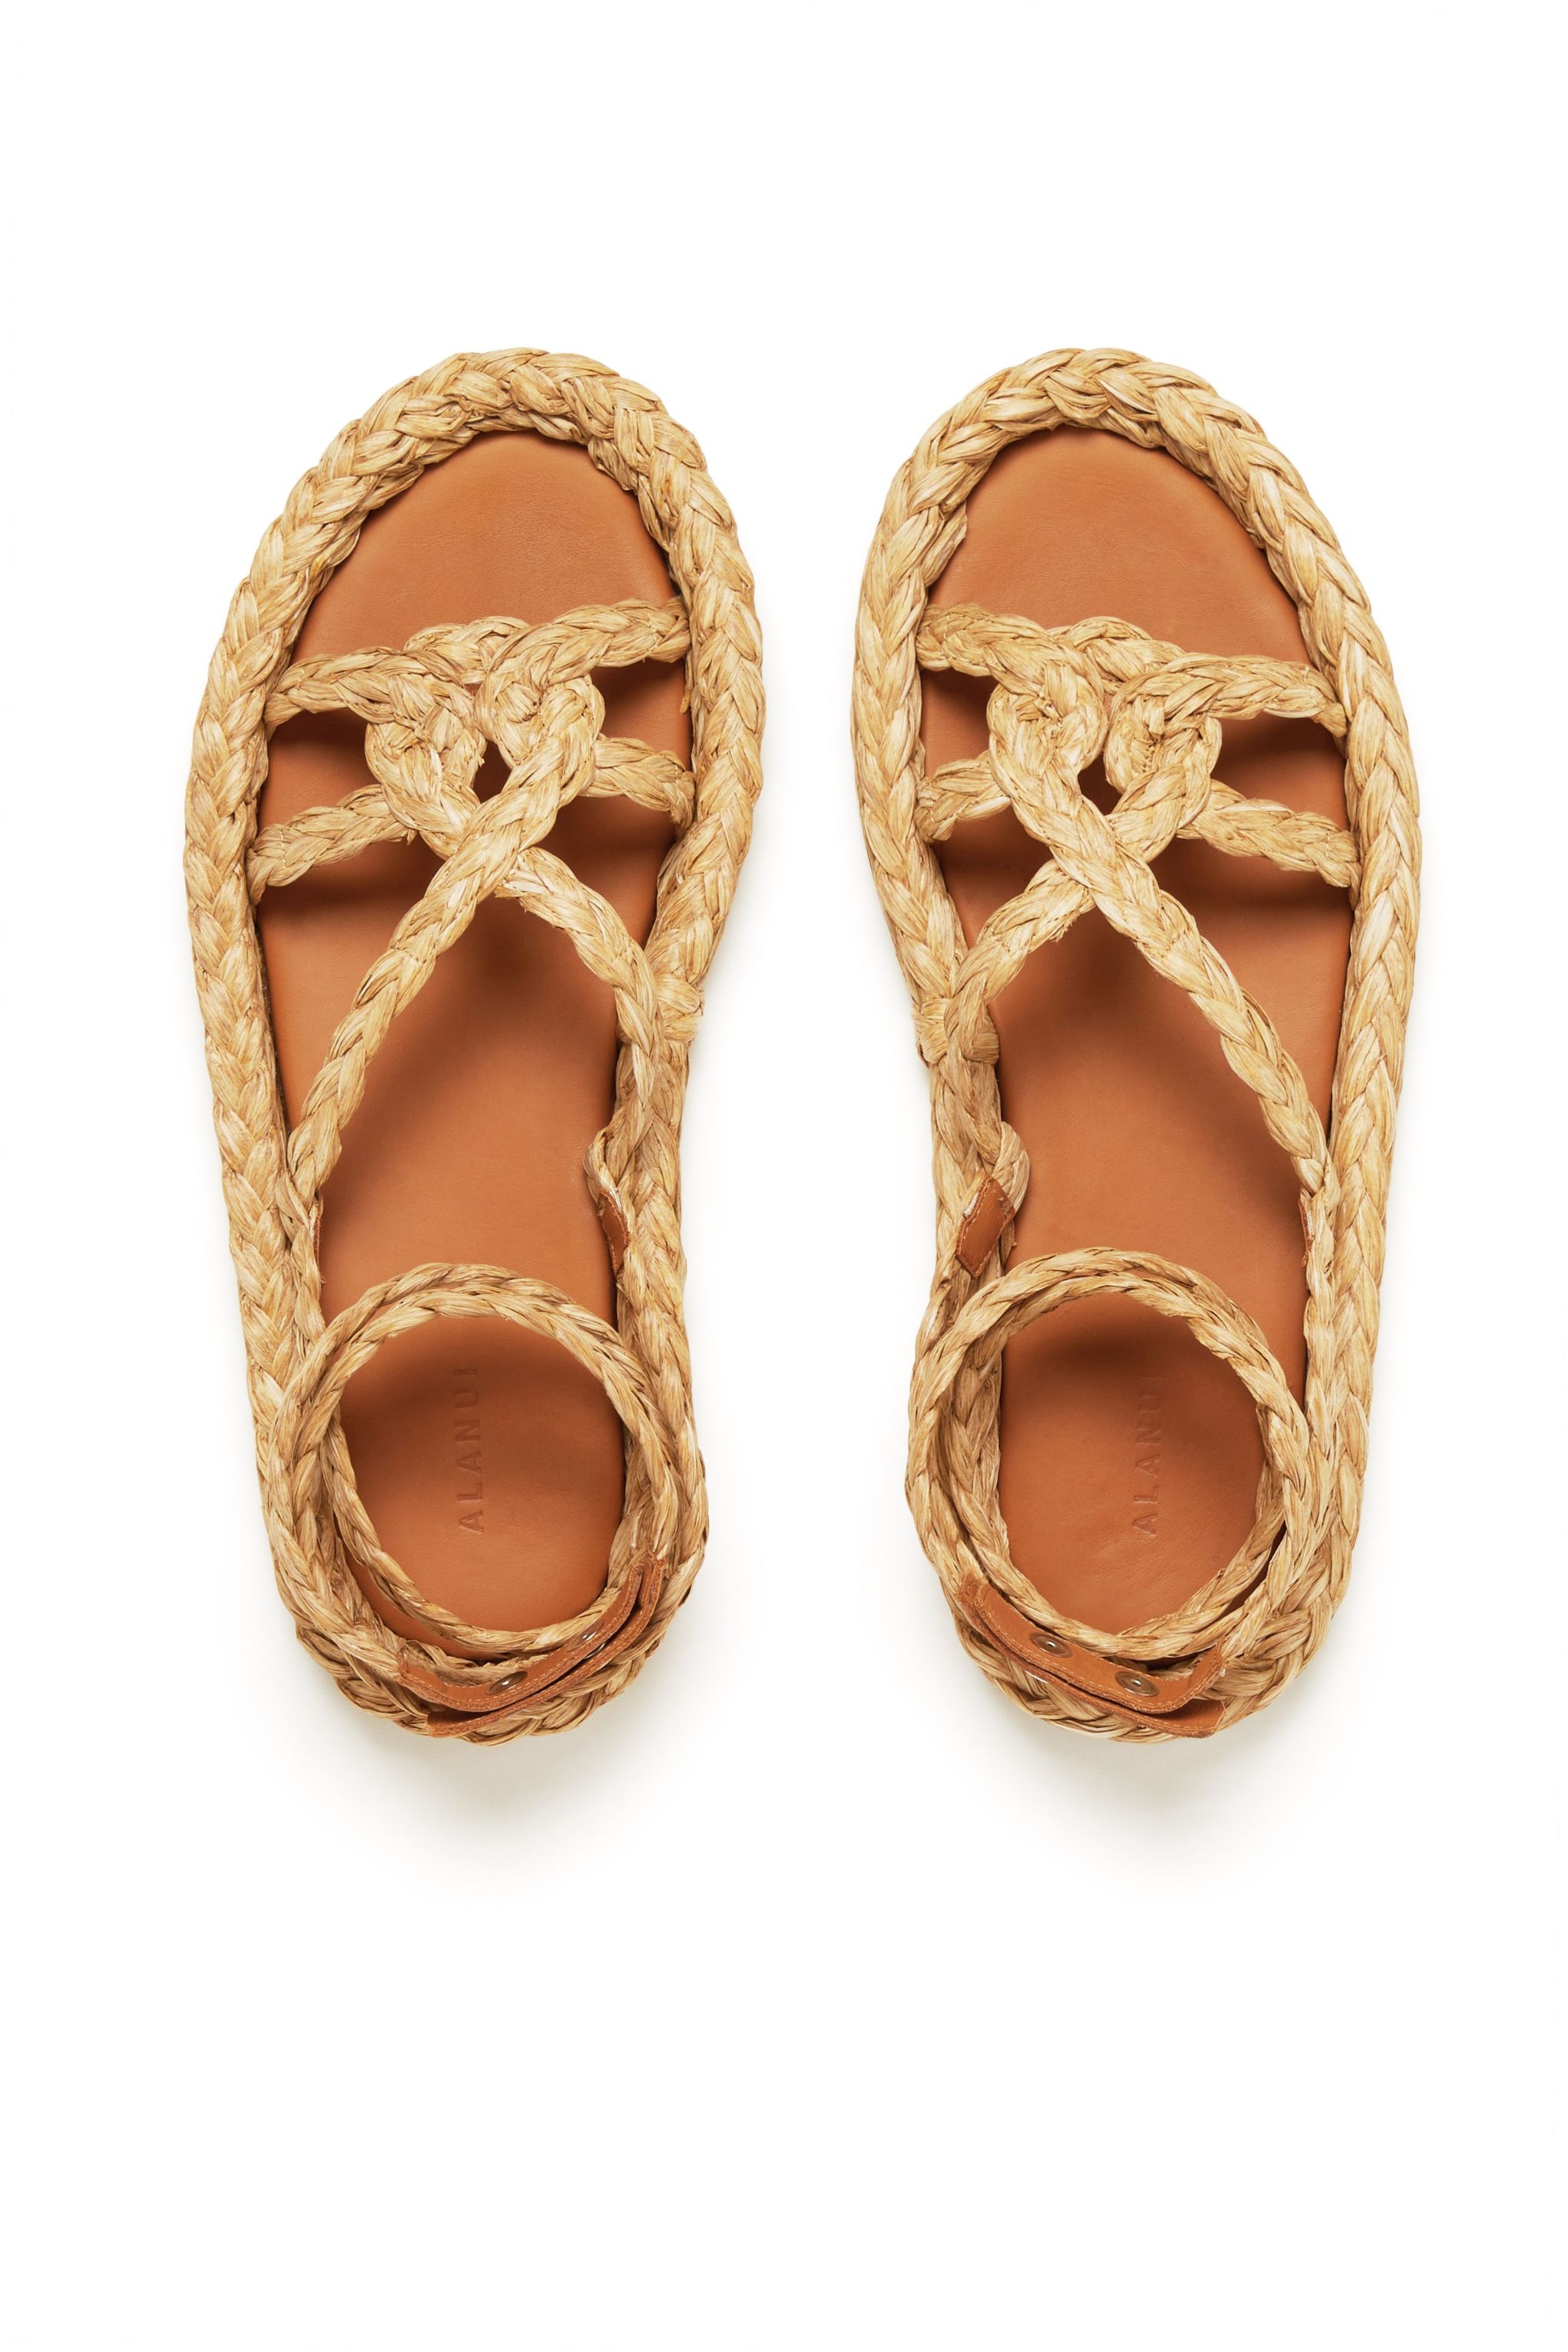 A Love Letter To India Sandals - 5